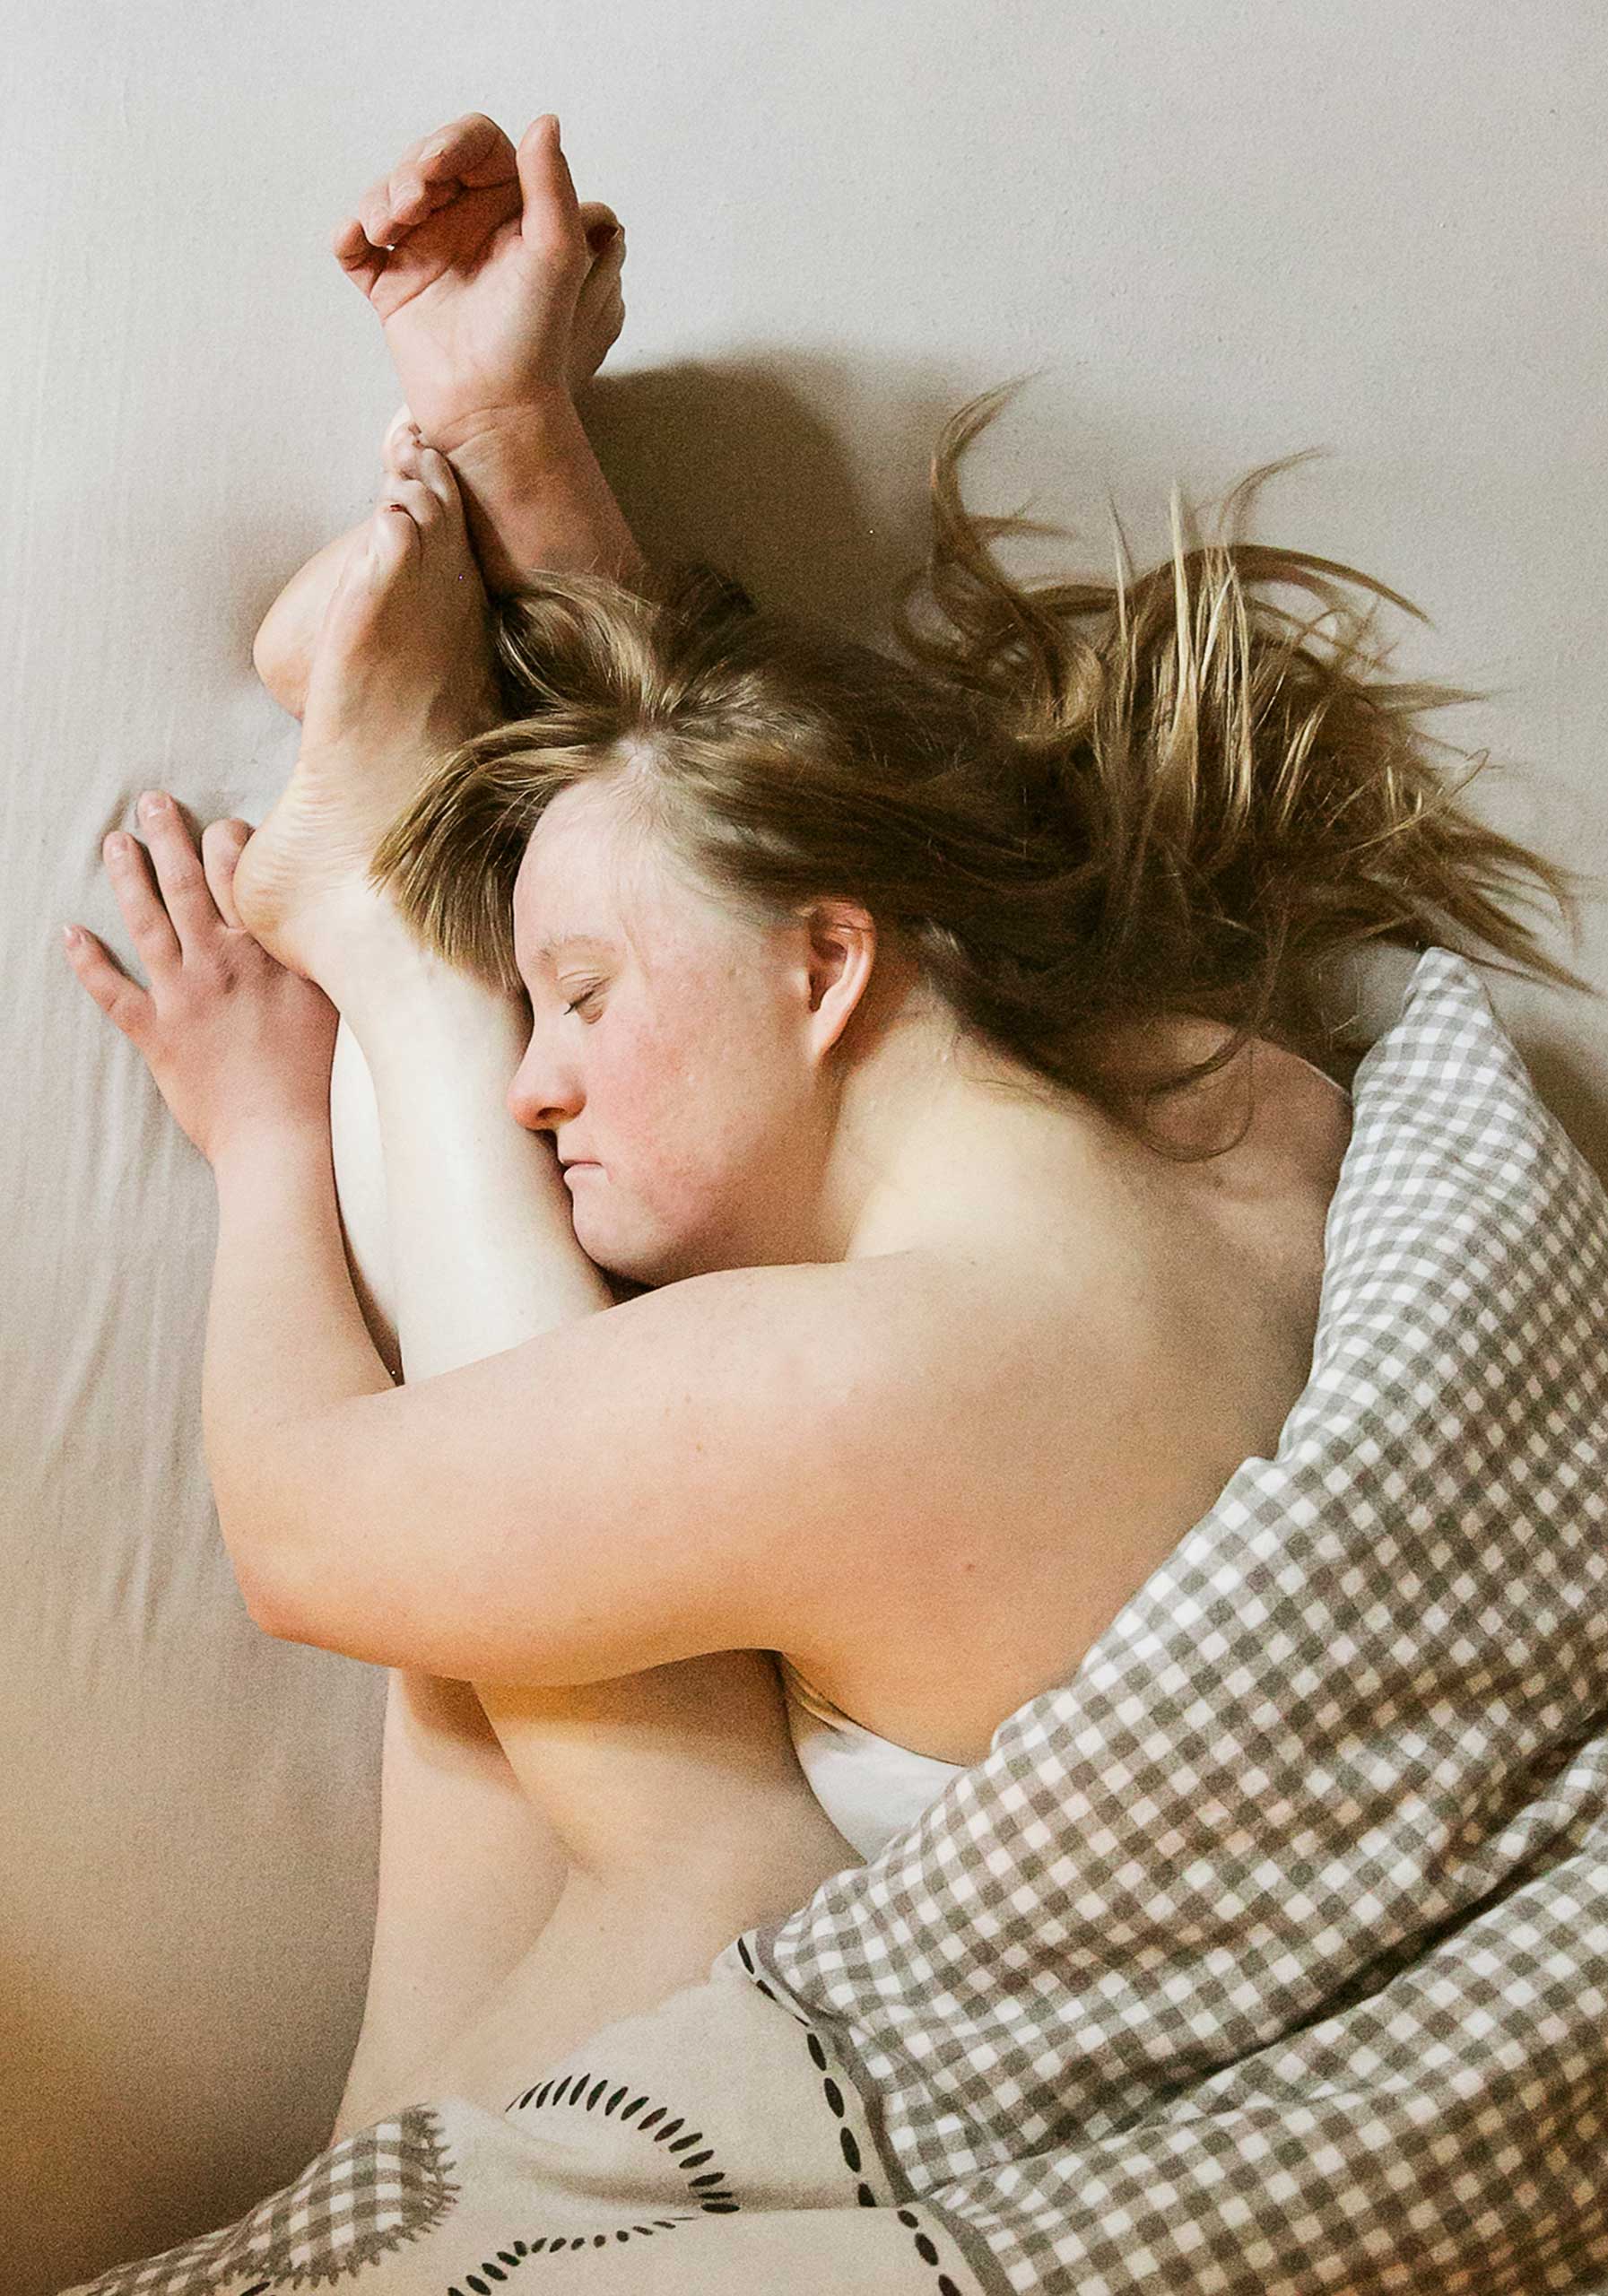 Nominated in the People category. Sabine Lewandowski's work on Down syndrome.